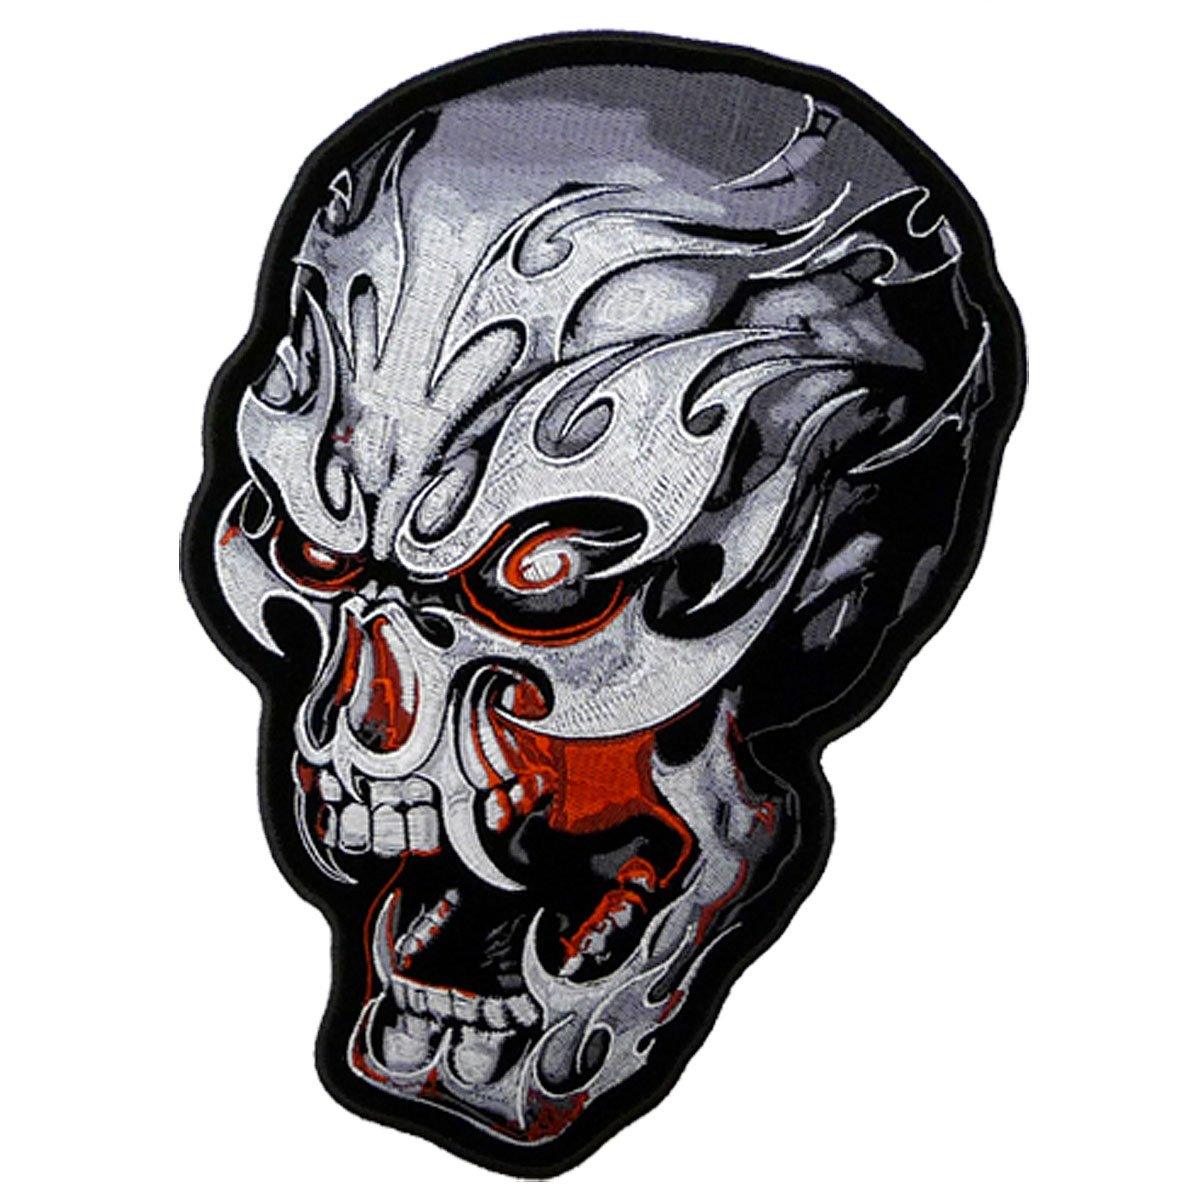 Hot Leathers Electric Skull Biker 3" X 4" Patch - American Legend Rider